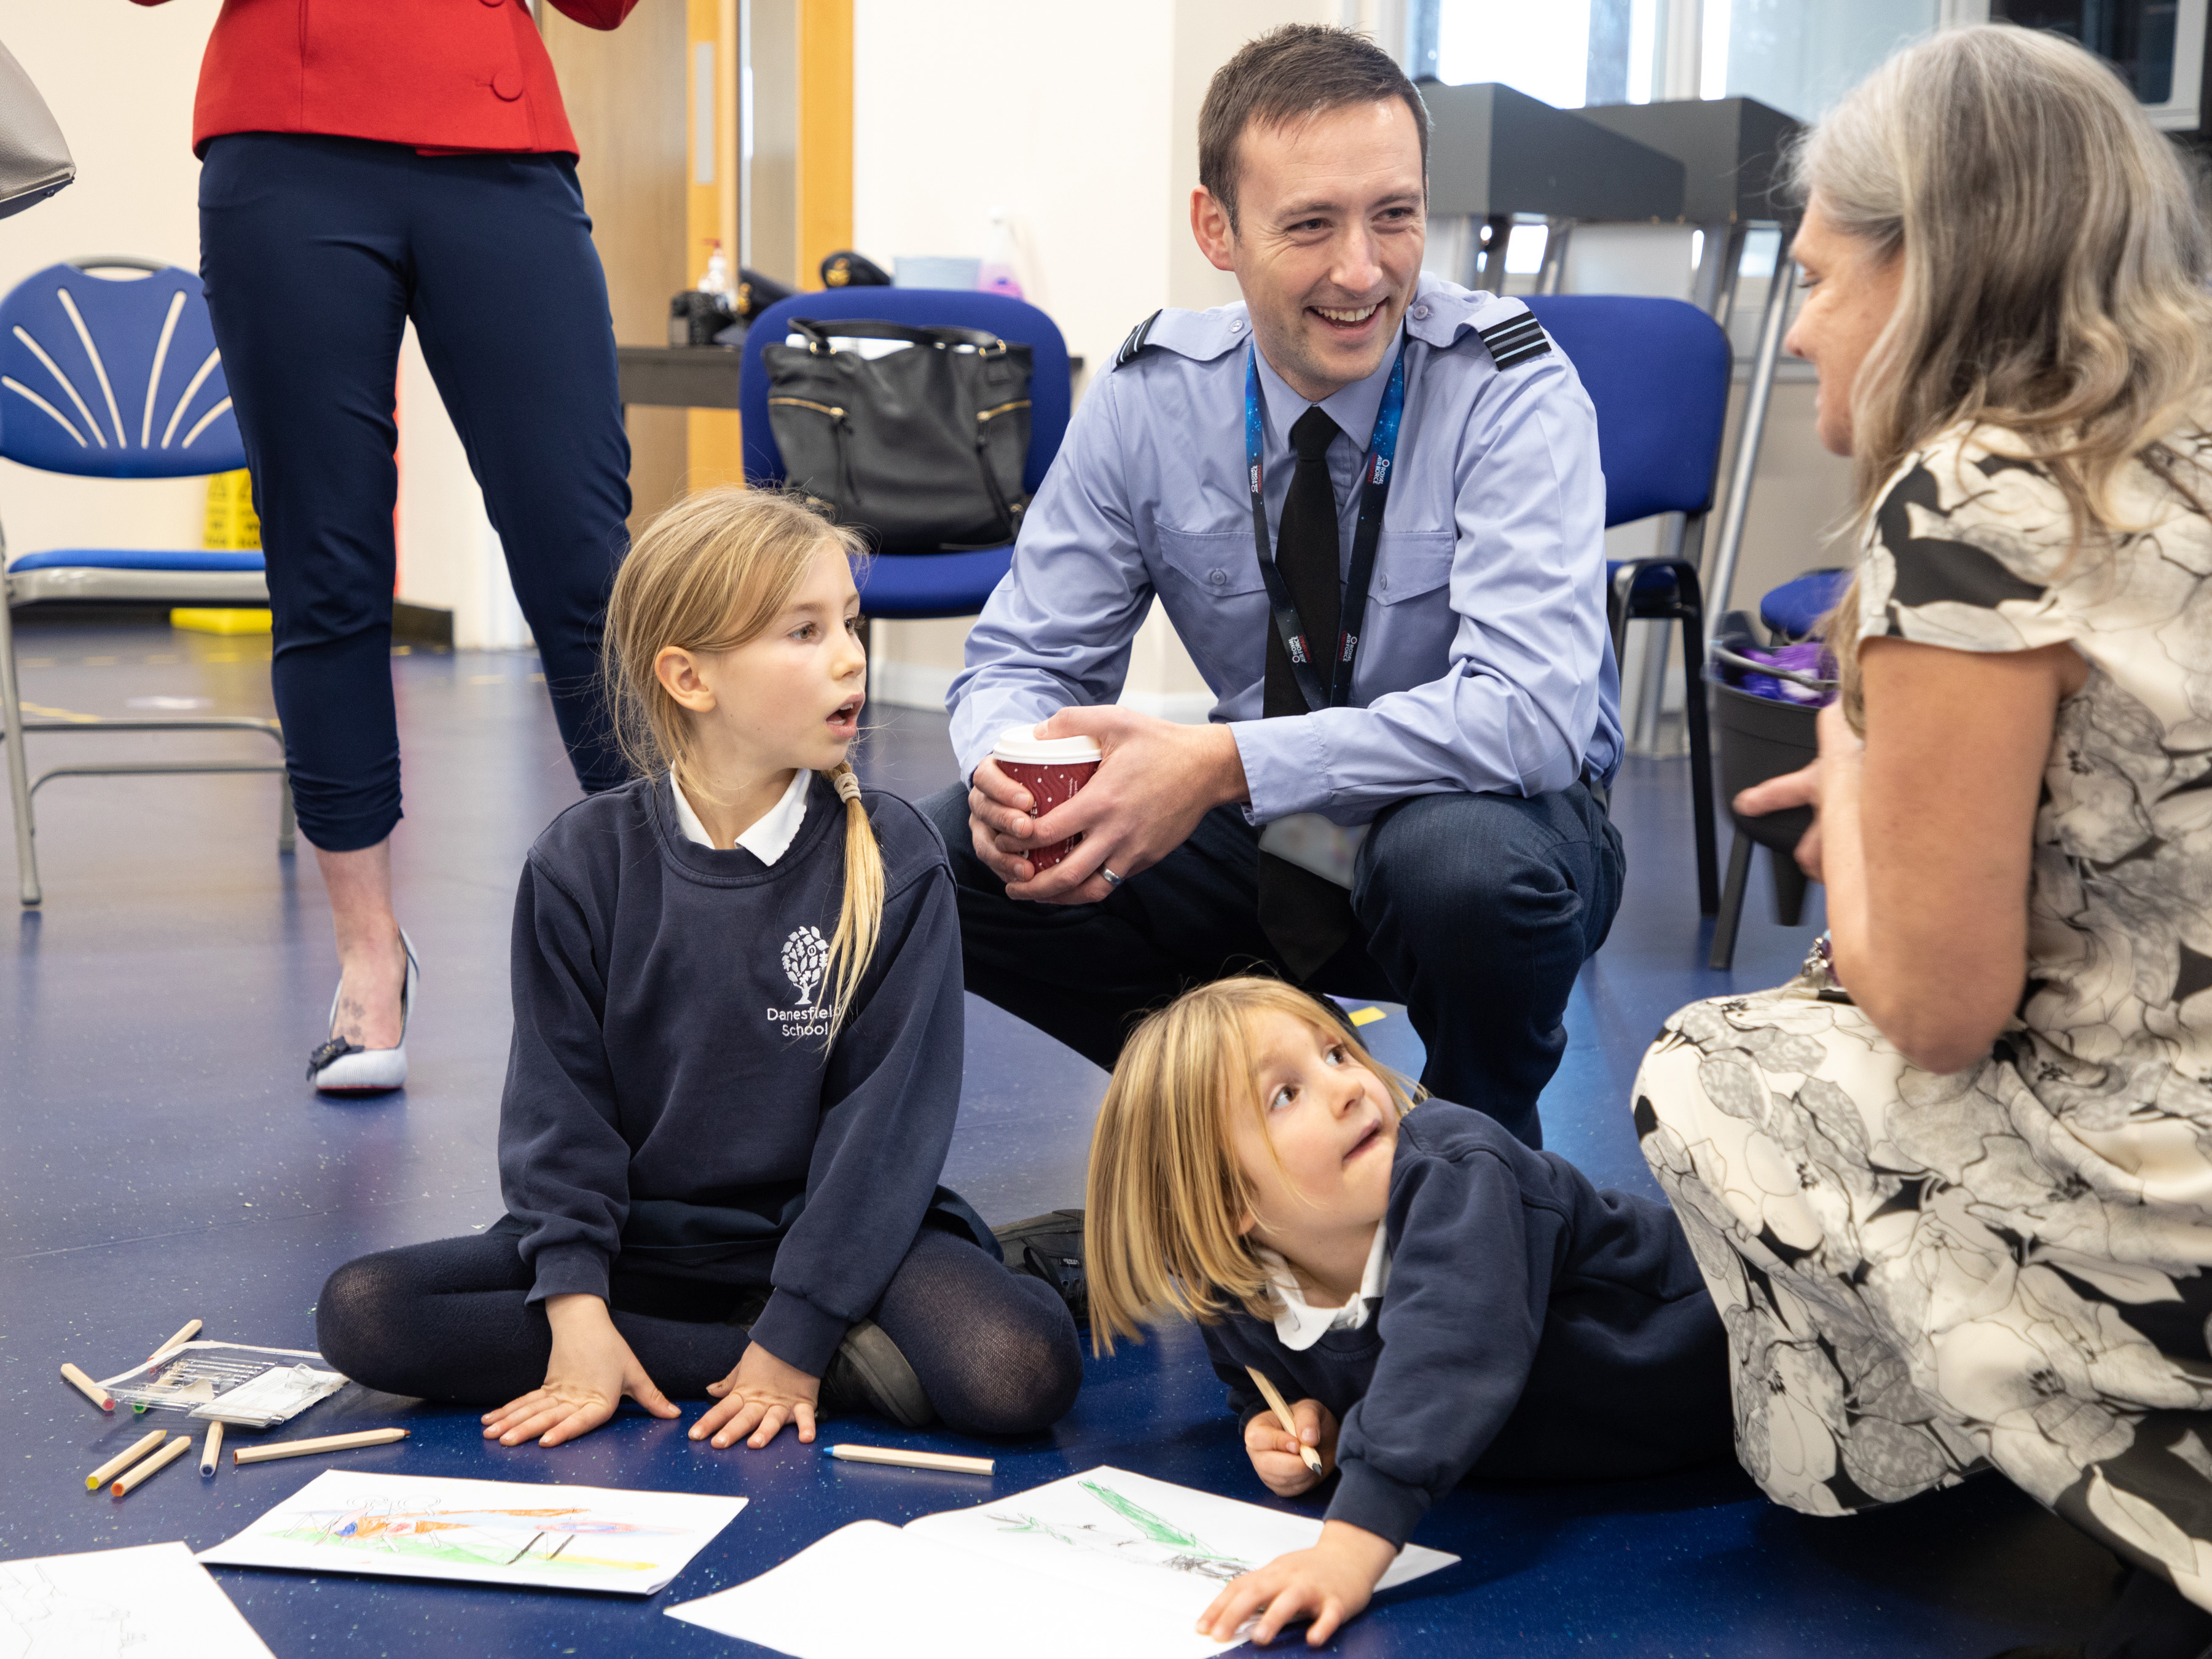 Image shows RAF aviator with school children and civilians.